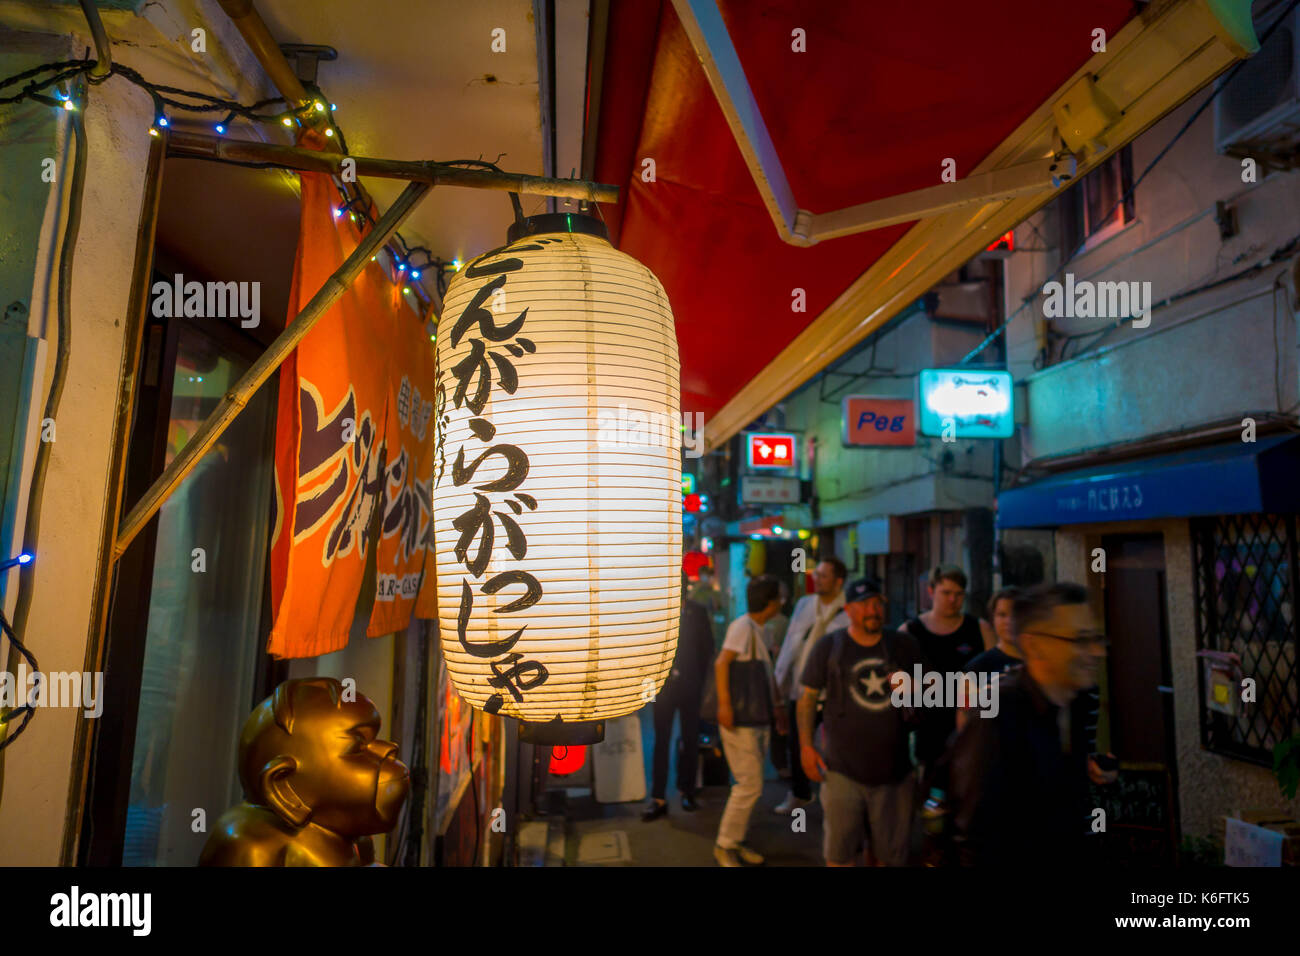 TOKYO, JAPAN JUNE 28 - 2017: White lantern with Japanesse letters at night in traditional back street bars in Shinjuku Golden Gai. Golden gai consists of 6 tiny alleys with 200 tiny bars and 20th century atmosphere, located in Tokyo Stock Photo